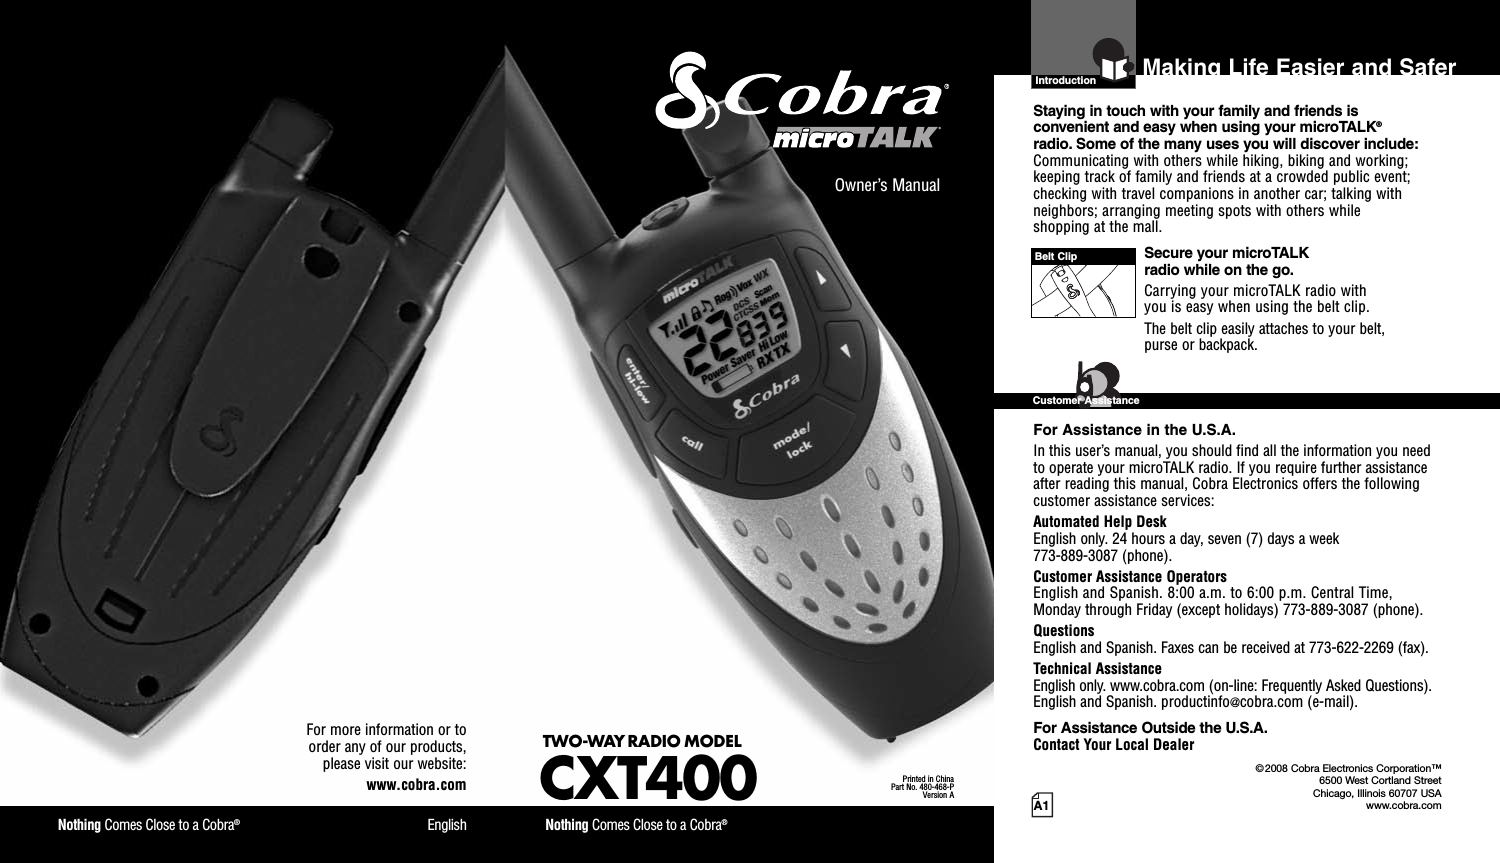 Nothing Comes Close to a Cobra®EnglishFor more information or toorder any of our products,please visit our website:www.cobra.comA1Making Life Easier and SaferOwner’s ManualNothing Comes Close to a Cobra®TWO-WAY RADIO MODELCXT400Printed in ChinaPart No. 480-468-PVersion AIntroductionStaying in touch with your family and friends isconvenient and easy when using your microTALK®radio. Some of the many uses you will discover include:Communicating with others while hiking, biking and working;keeping track of family and friends at a crowded public event;checking with travel companions in another car; talking withneighbors; arranging meeting spots with others whileshopping at the mall.Secure your microTALKradio while on the go.Carrying your microTALK radio withyou is easy when using the belt clip.The belt clip easily attaches to your belt,purse or backpack.For Assistance in the U.S.A.In this user’s manual, you should find all the information you needto operate your microTALK radio. If you require further assistanceafter reading this manual, Cobra Electronics offers the followingcustomer assistance services:Automated Help DeskEnglish only. 24 hours a day, seven (7) days a week773-889-3087 (phone).Customer Assistance OperatorsEnglish and Spanish. 8:00 a.m. to 6:00 p.m. Central Time,Monday through Friday (except holidays) 773-889-3087 (phone).QuestionsEnglish and Spanish. Faxes can be received at 773-622-2269 (fax).Technical AssistanceEnglish only. www.cobra.com (on-line: Frequently Asked Questions).English and Spanish. productinfo@cobra.com (e-mail).For Assistance Outside the U.S.A.Contact Your Local DealerBelt ClipCustomer Assistance©2008 Cobra Electronics Corporation™6500 West Cortland StreetChicago, Illinois 60707 USAwww.cobra.com